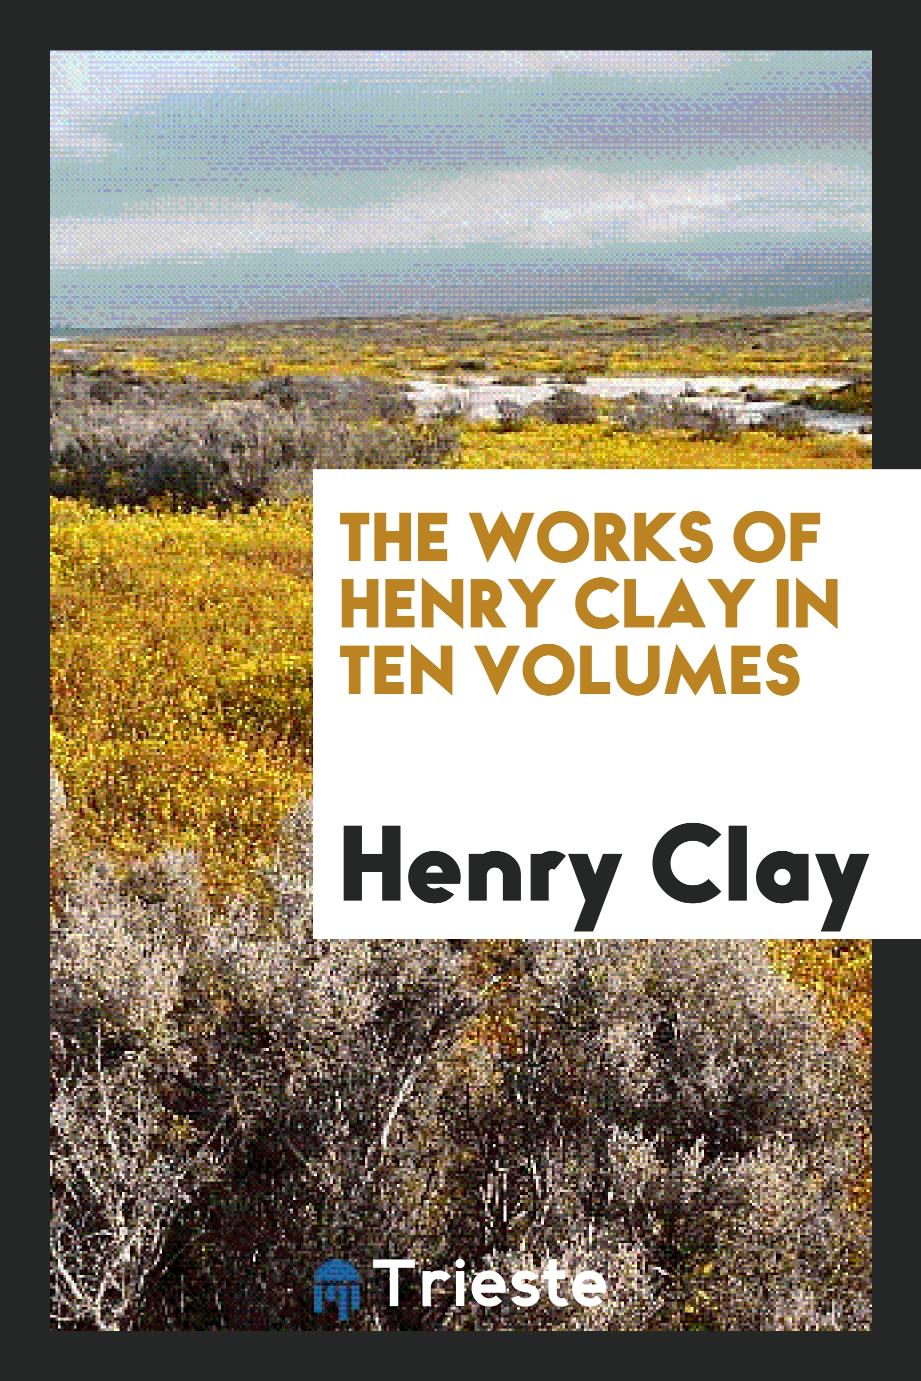 The Works of Henry Clay in Ten Volumes